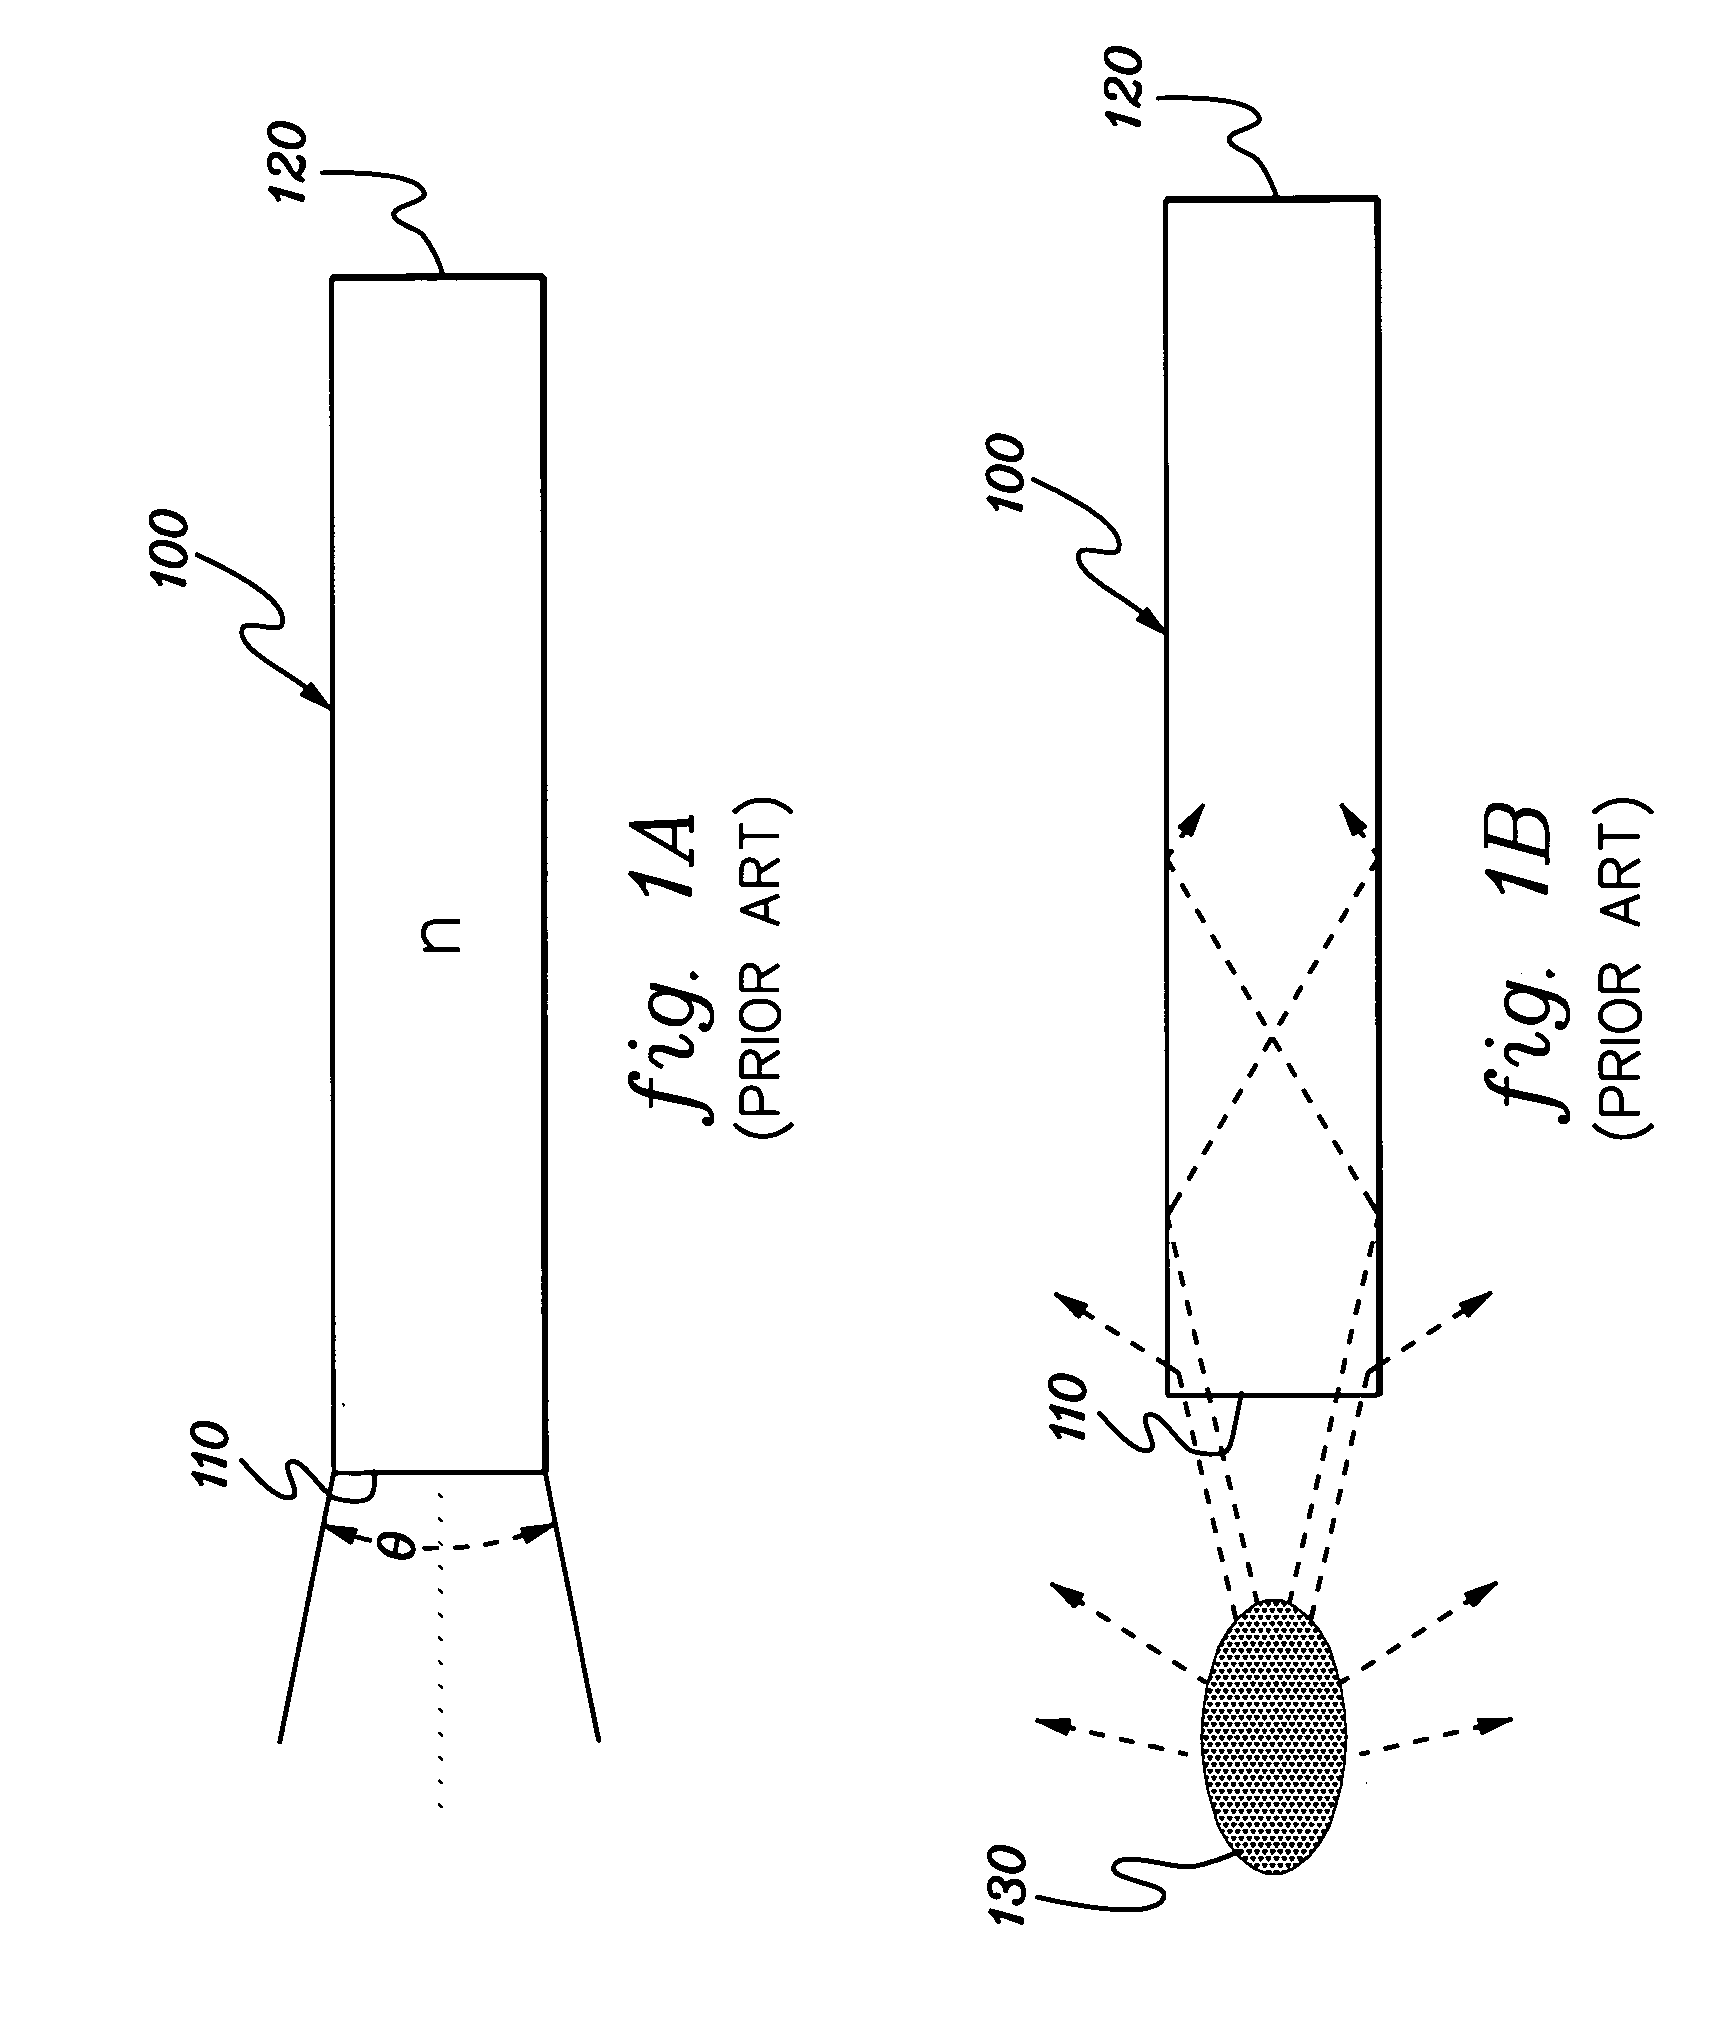 Light pipe optical coupling utilizing convex-shaped light pipe end